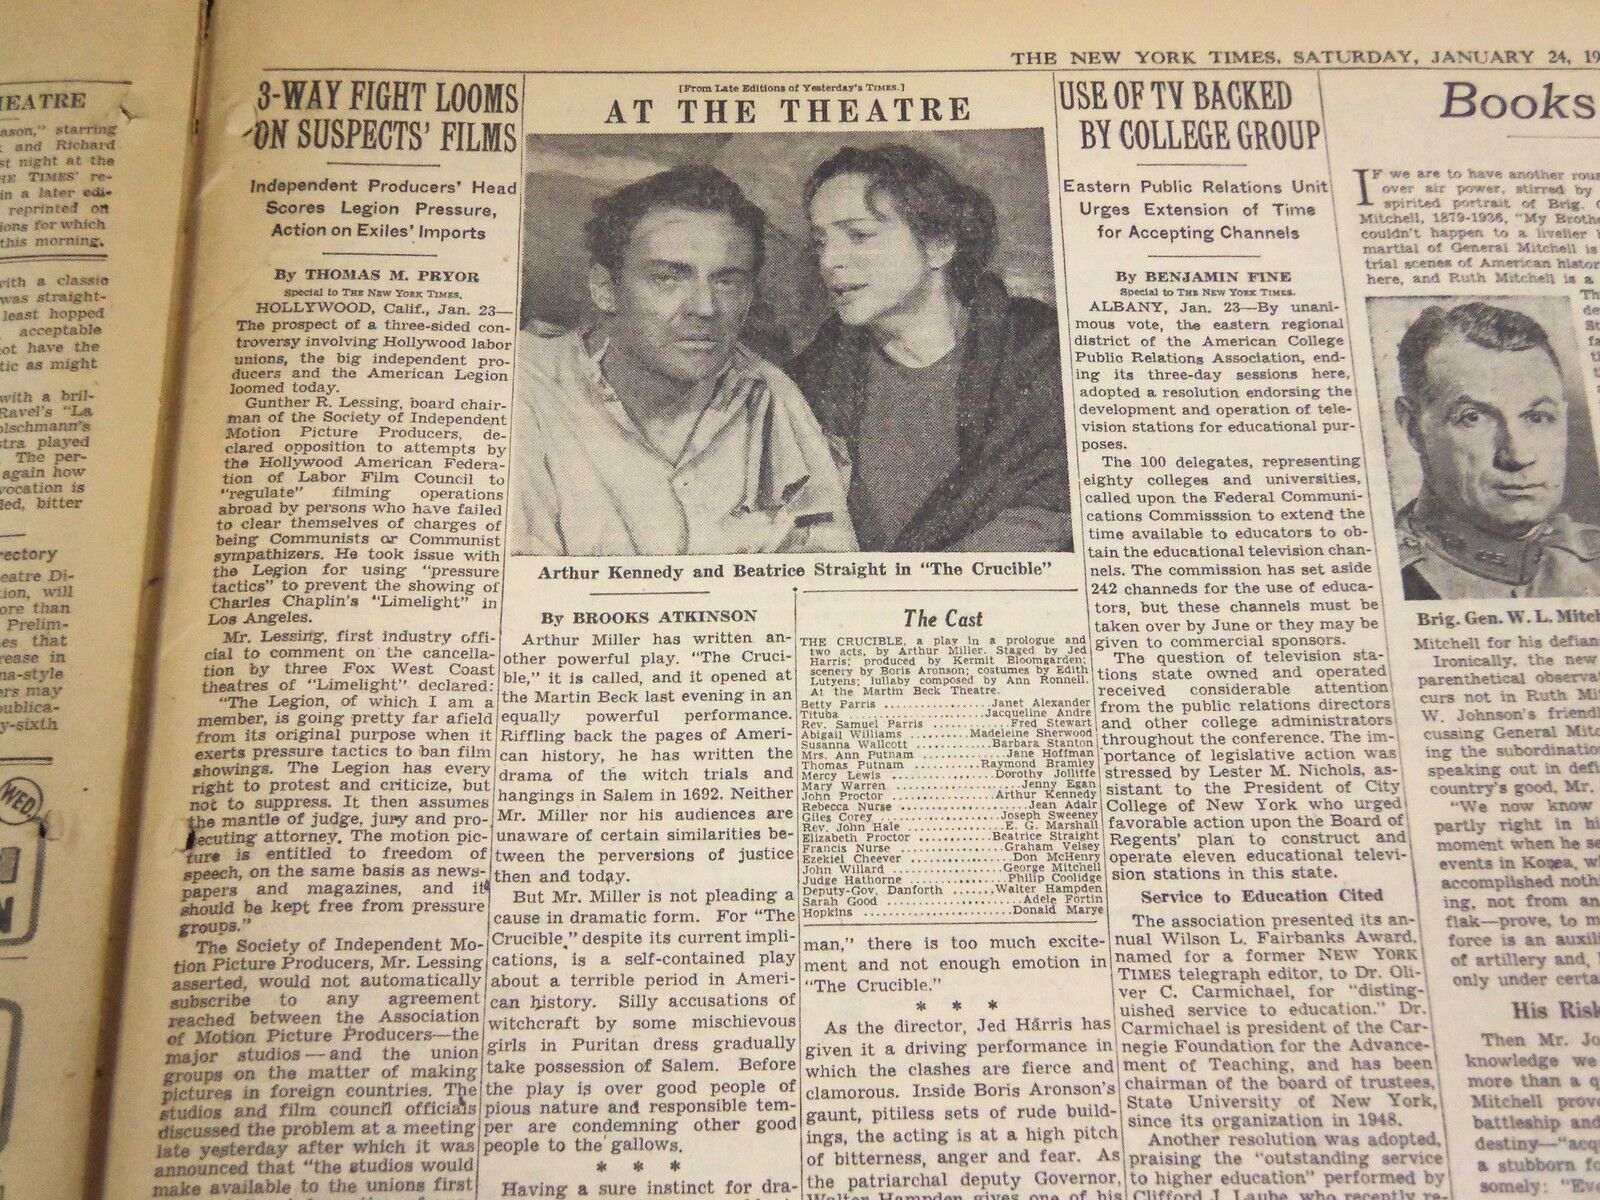 1953 JANUARY 24 NEW YORK TIMES - MILLER'S CRUCIBLE OPENS - NT 4260